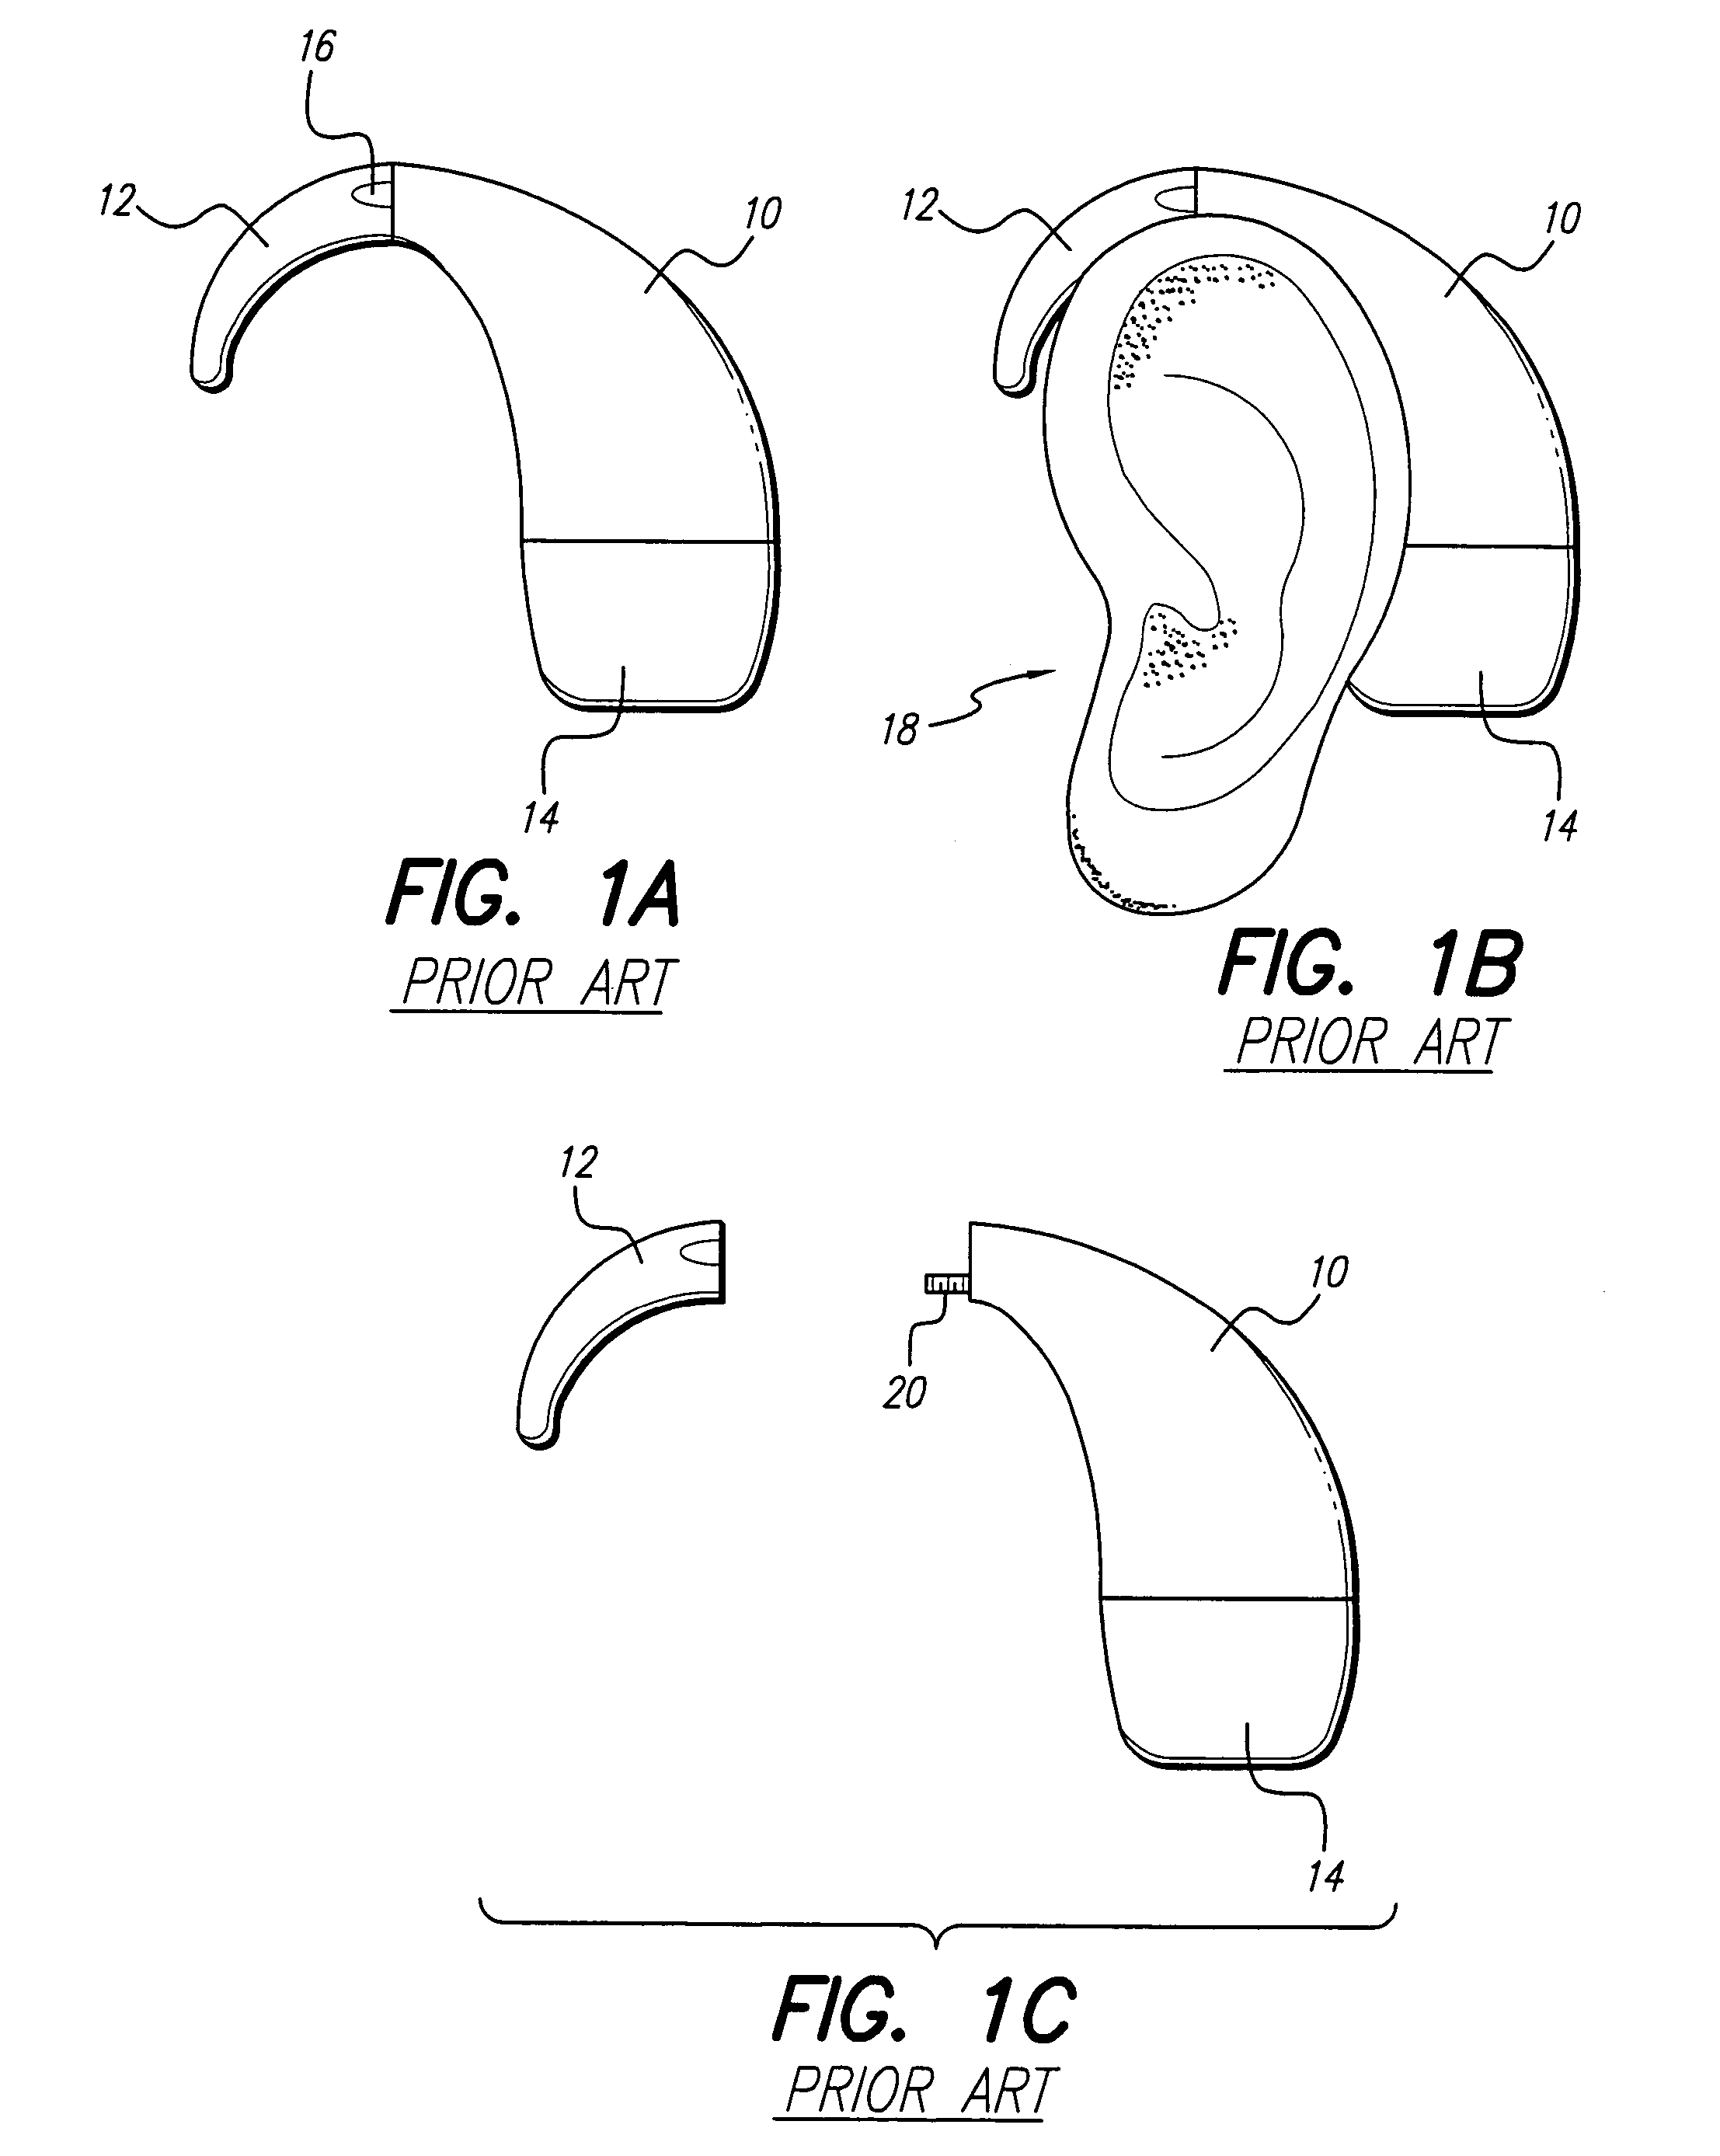 Method of constructing an in the ear auxiliary microphone for behind the ear hearing prosthetic